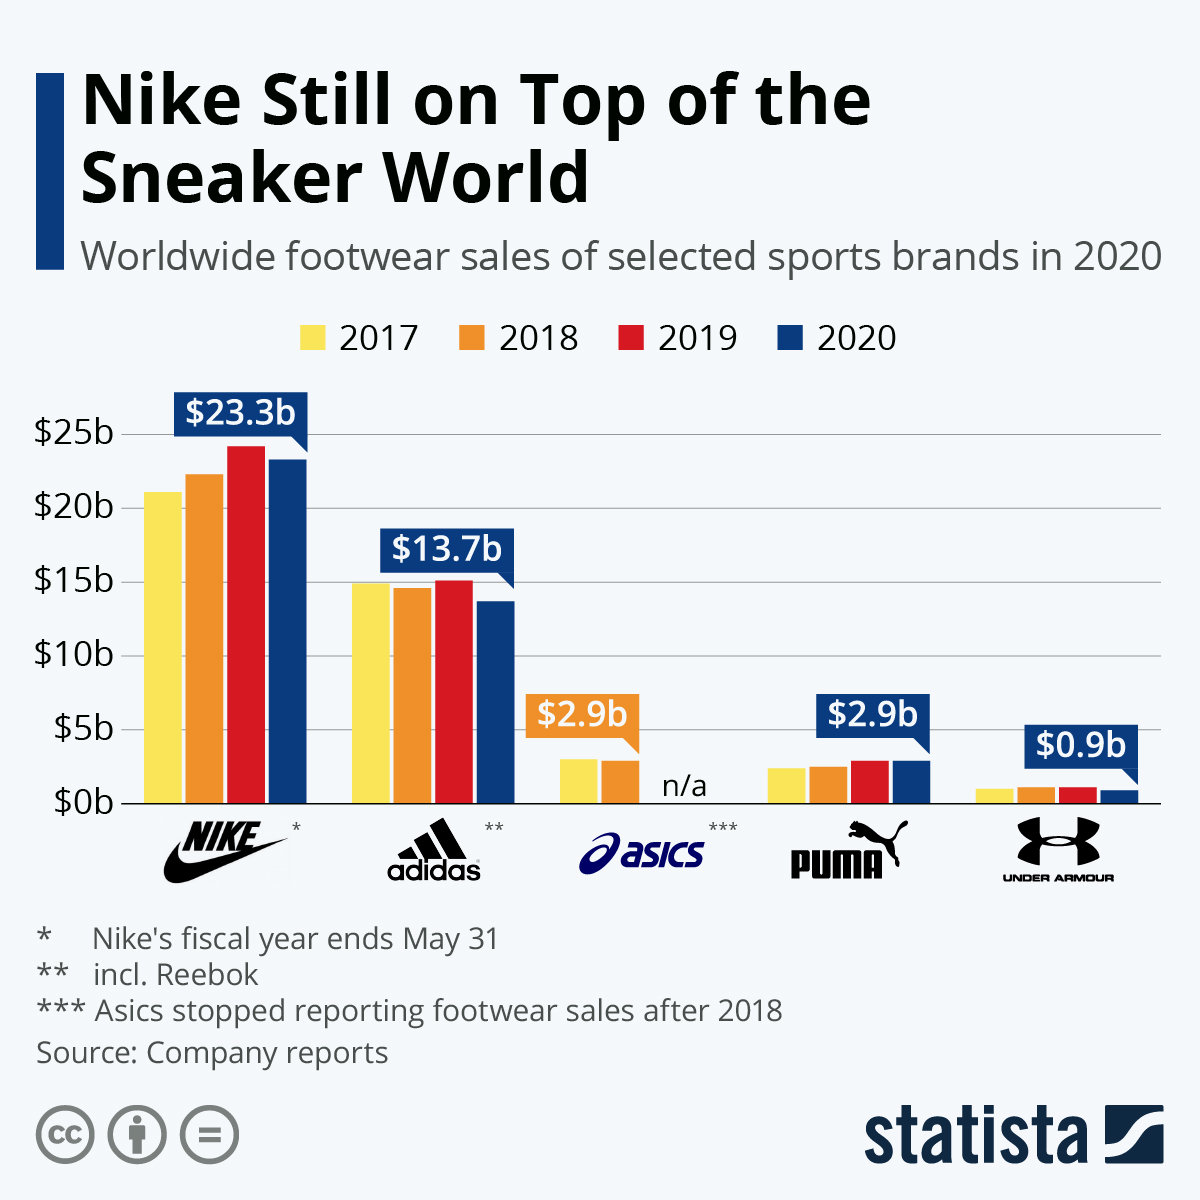 Nike dominates the sneakers world